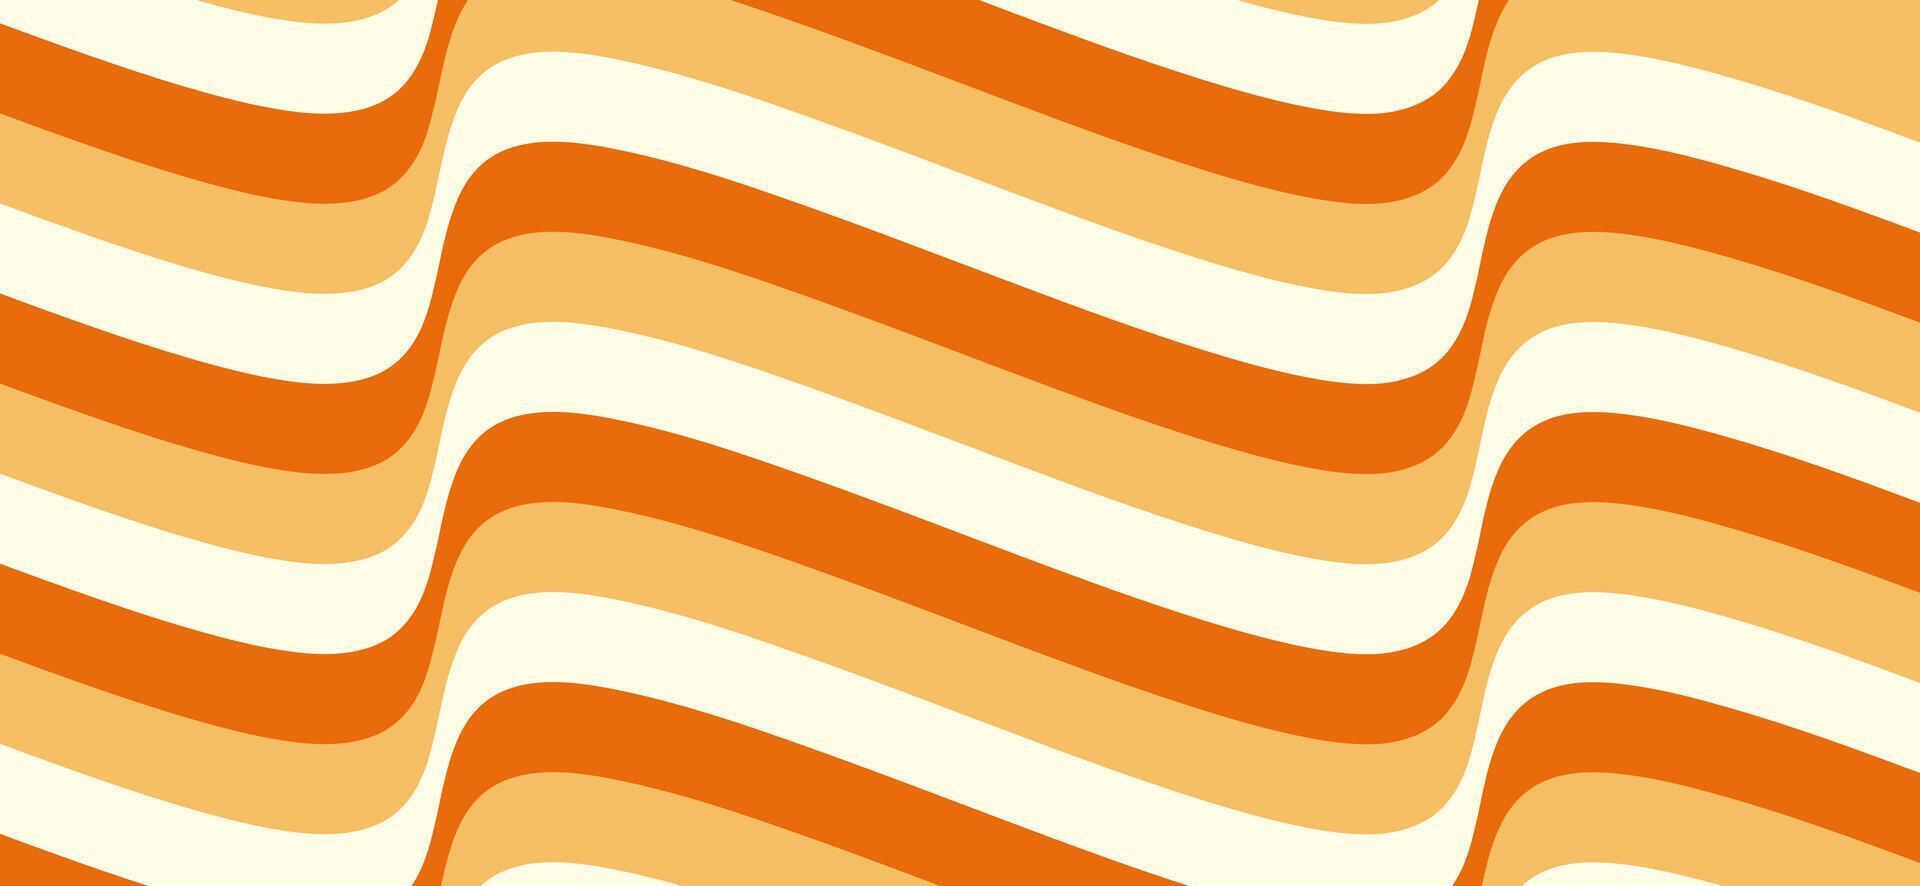 Striped caramel wave background. Toffee texture with cream. Psychedelic candy pattern. Illusion of movement. vector